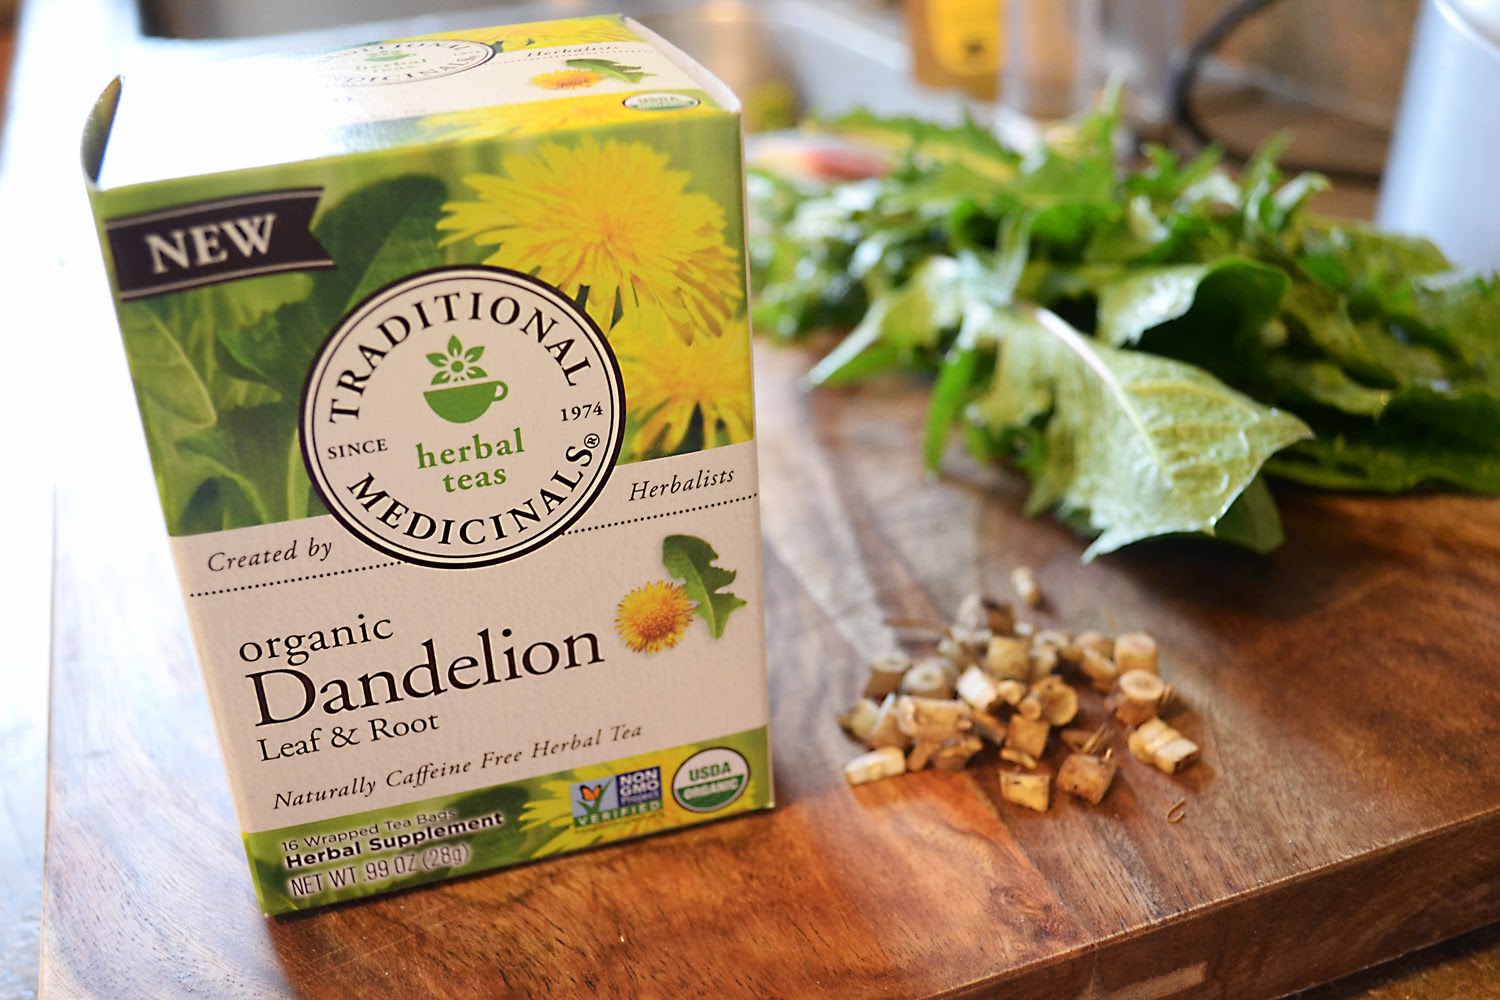 Traditional Medicinals Dandelion leaf and root tea.  Get the health benefits of dandelions from drinking a daily cup of dandelion tea.